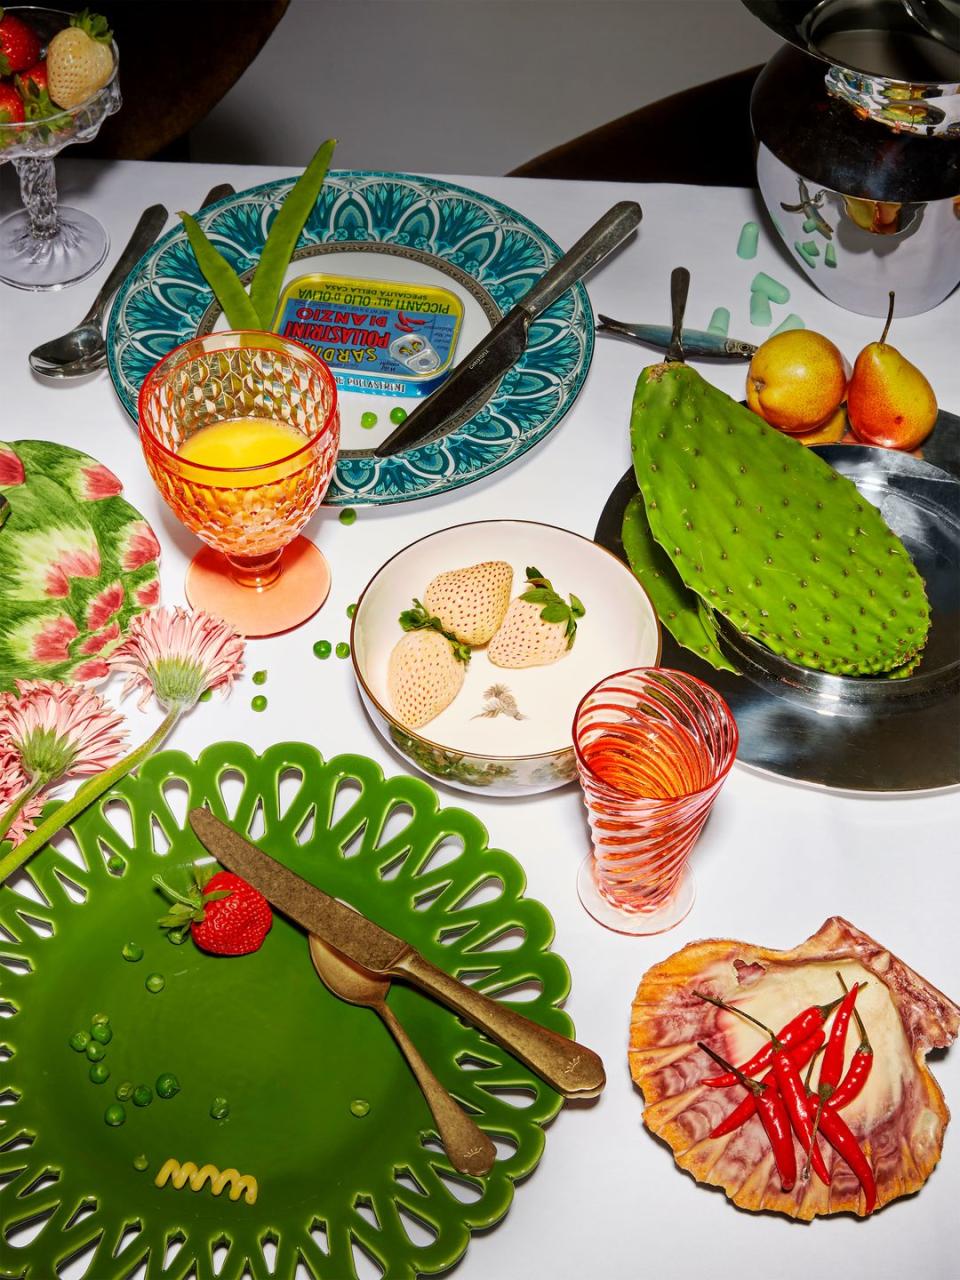 a table with plates in various colors and shapes with food and silverware and glassware